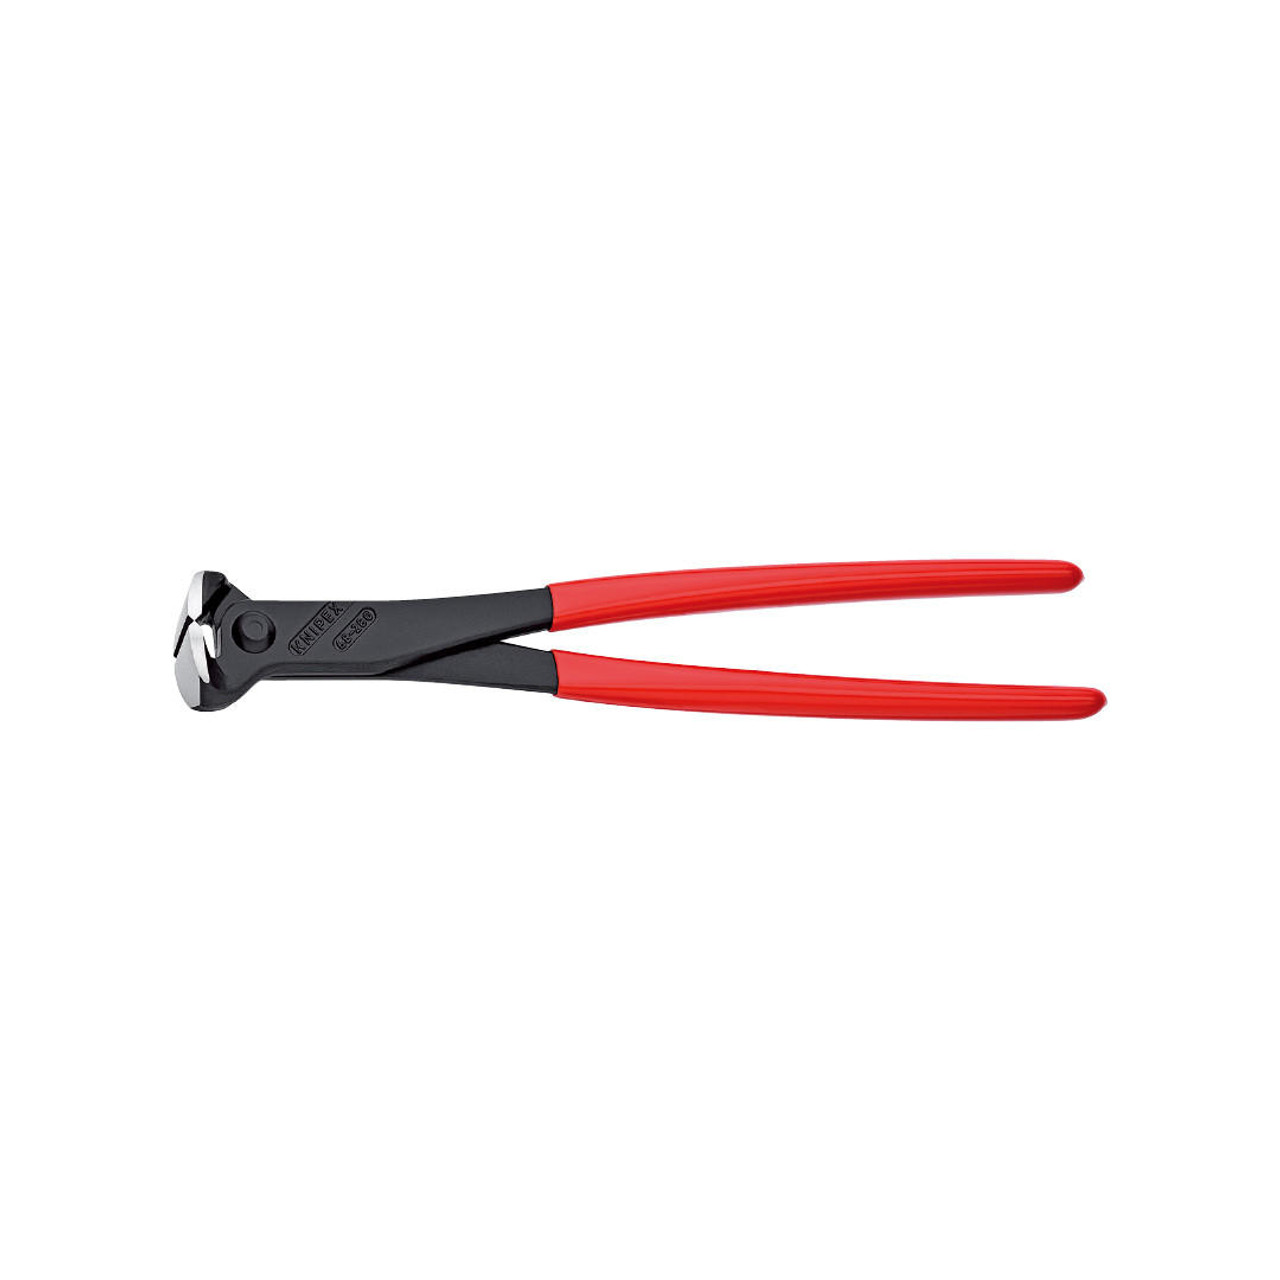 Knipex 200mm End Cutting Nippers